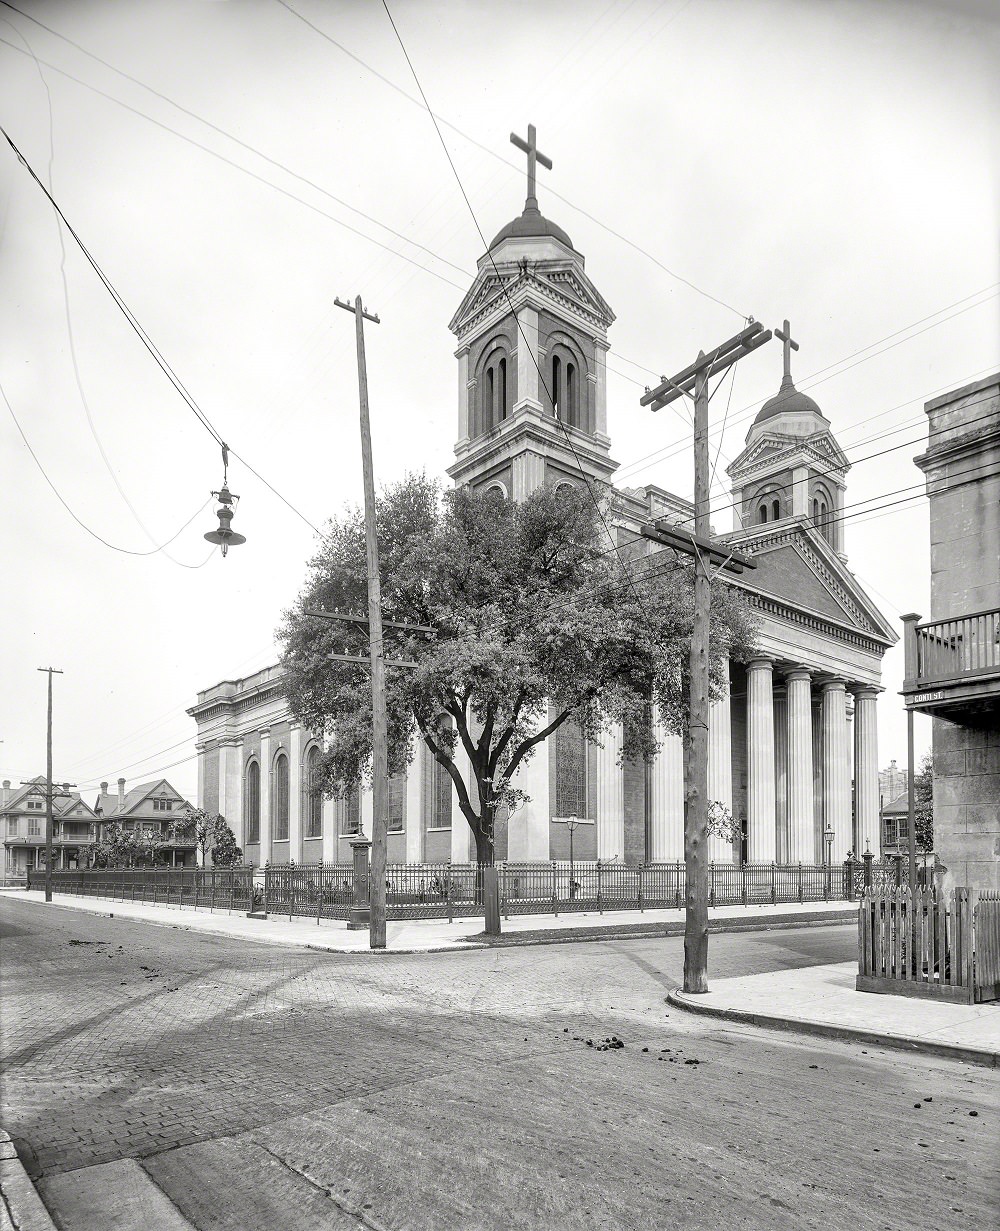 Catholic Cathedral of the Immaculate Conception, Conti Street, Mobile, Alabama, circa 1910